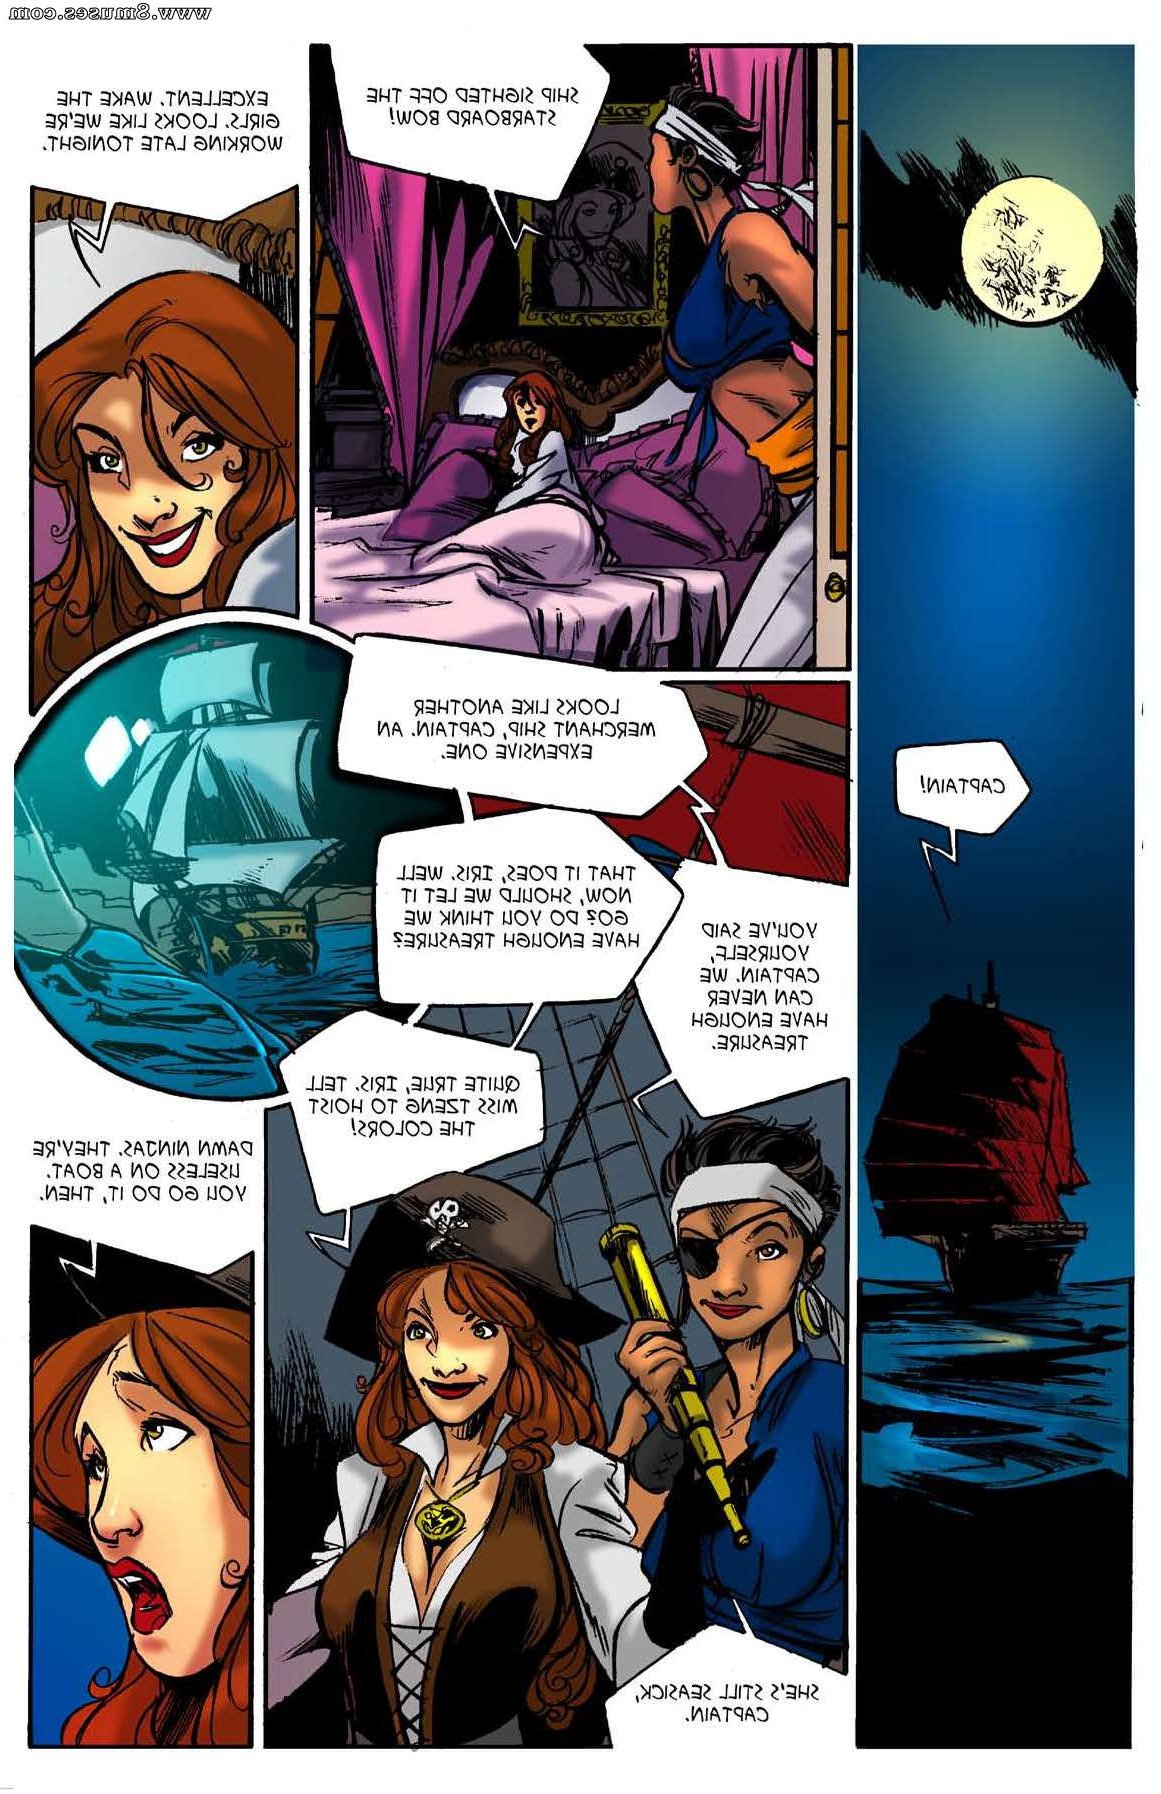 BE-Story-Club-Comics/A-Pirates-Life/Issue-1 A_Pirates_Life_-_Issue_1_8.jpg